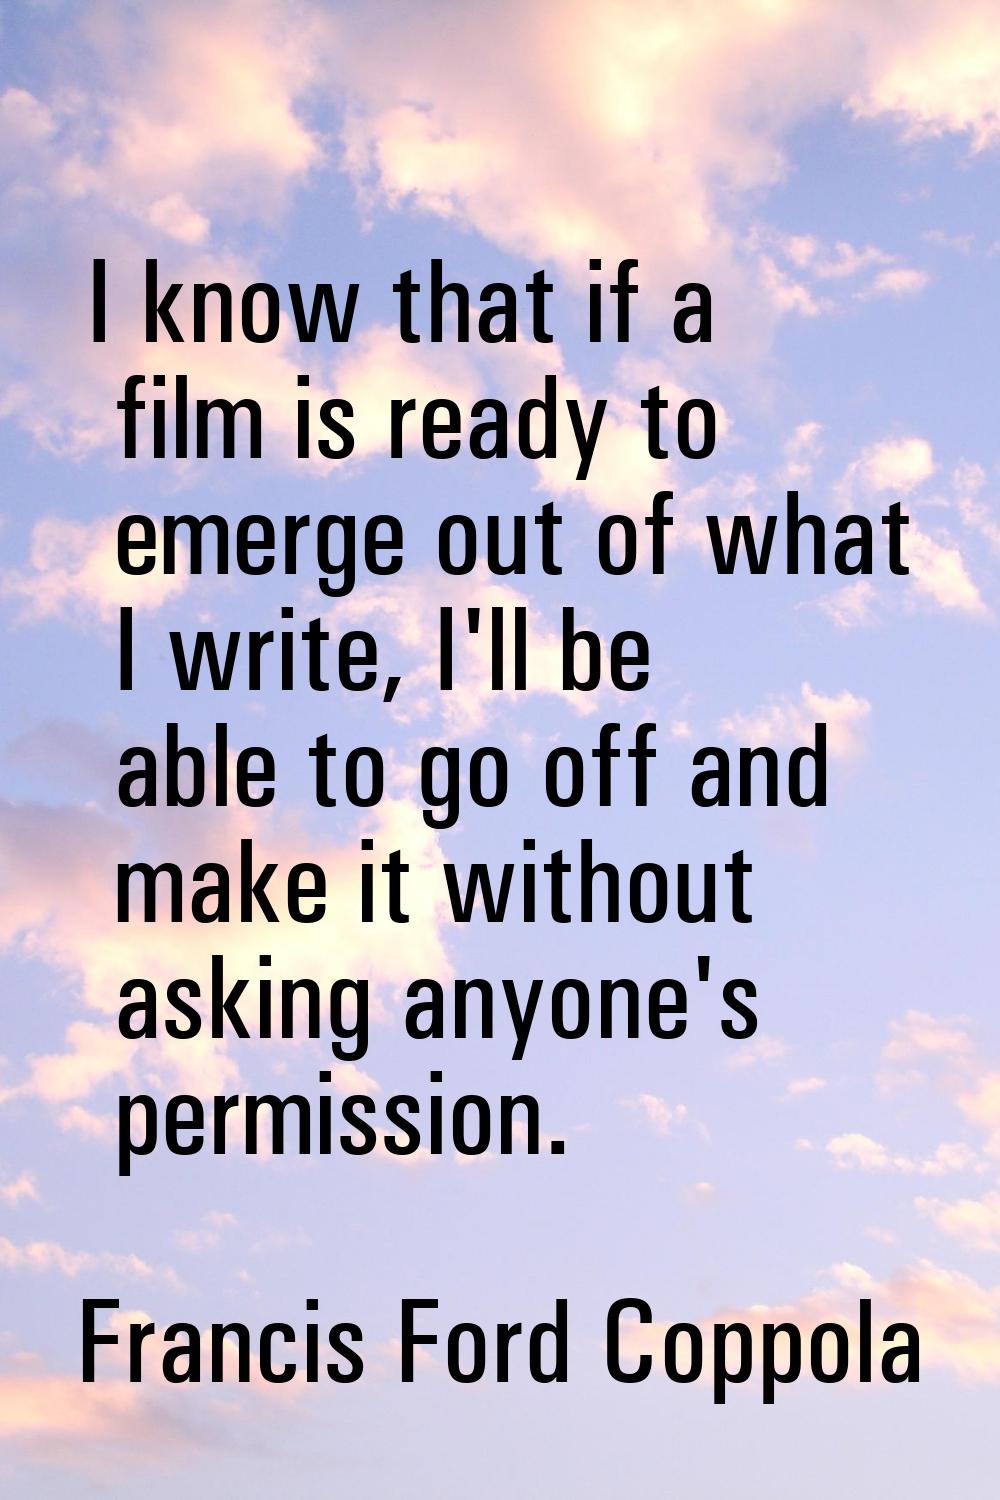 I know that if a film is ready to emerge out of what I write, I'll be able to go off and make it wi